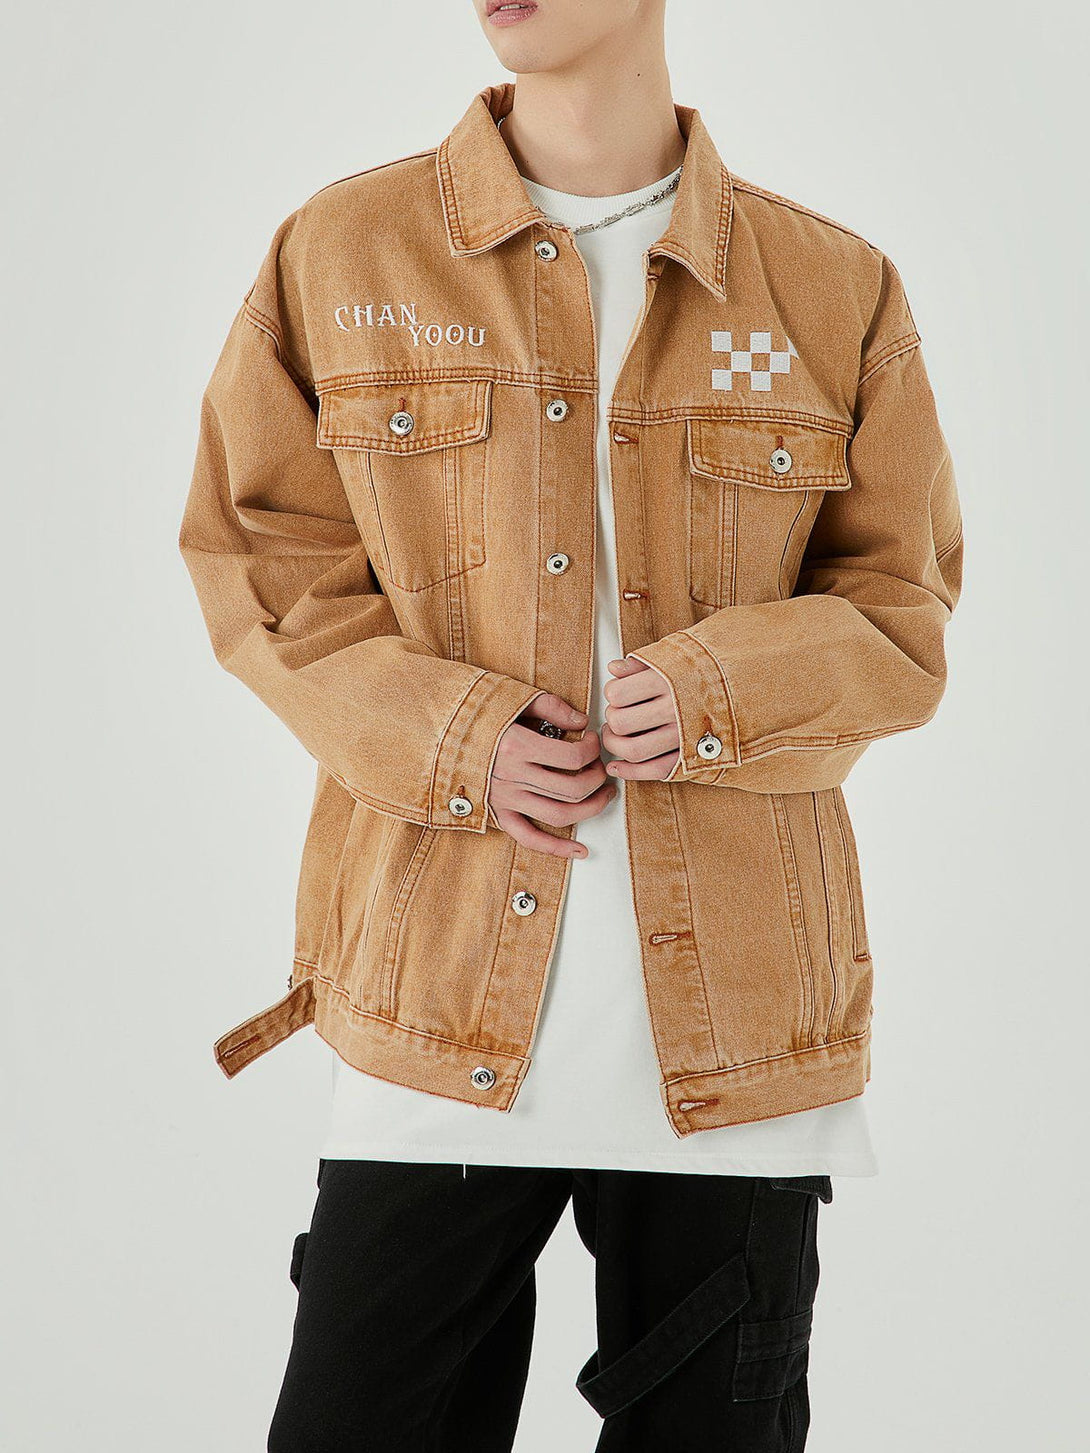 Levefly - Embroidered Checkerboard Denim Jacket - Streetwear Fashion - levefly.com